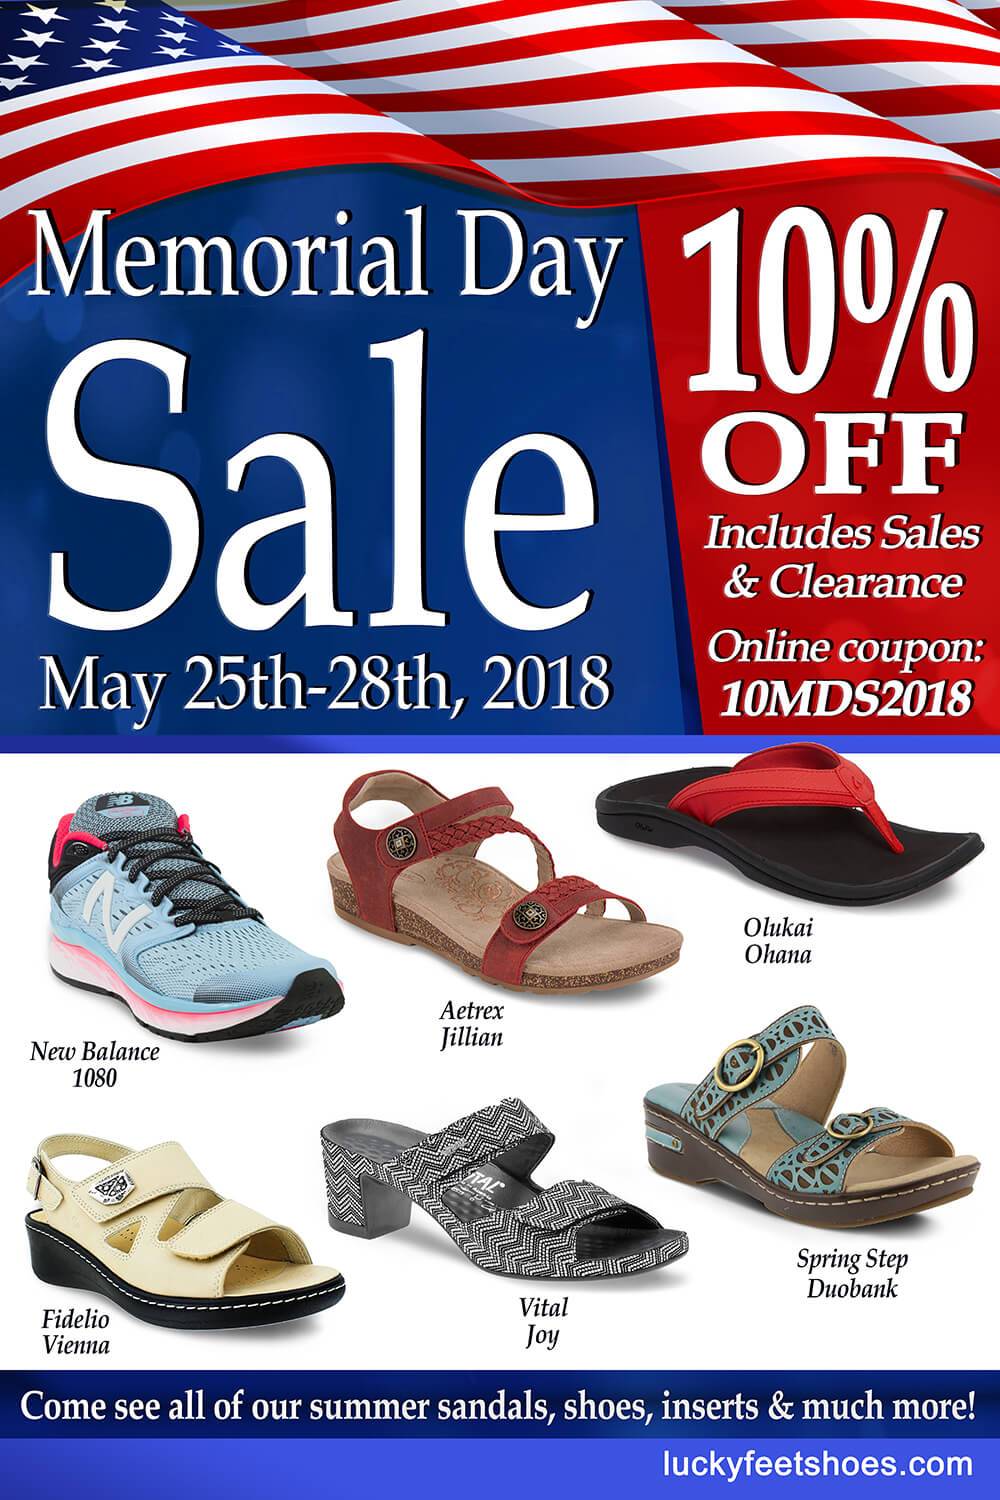 Memorial Day Sale 2018 | Sandals, Shoes 